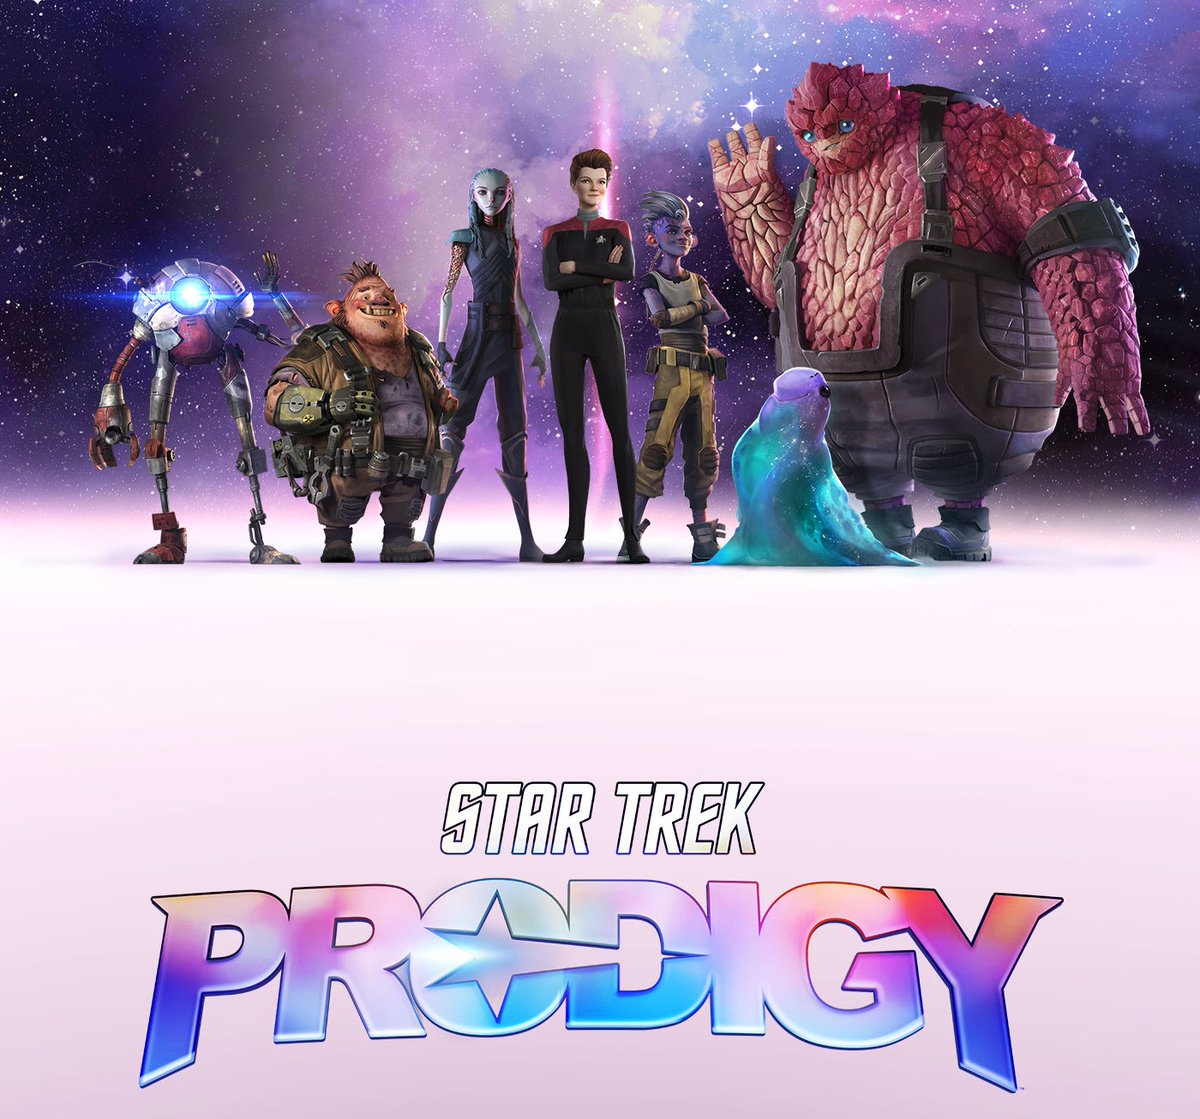 Star Trek Prodigy being cancelled in the middle of production of its second season sucks and it being unavailable to watch in a couple of days is criminal. Prodigy is a fun, wonderful show that absolutely gets what Star Trek is about. it deserves to be seen #savestartrekprodigy